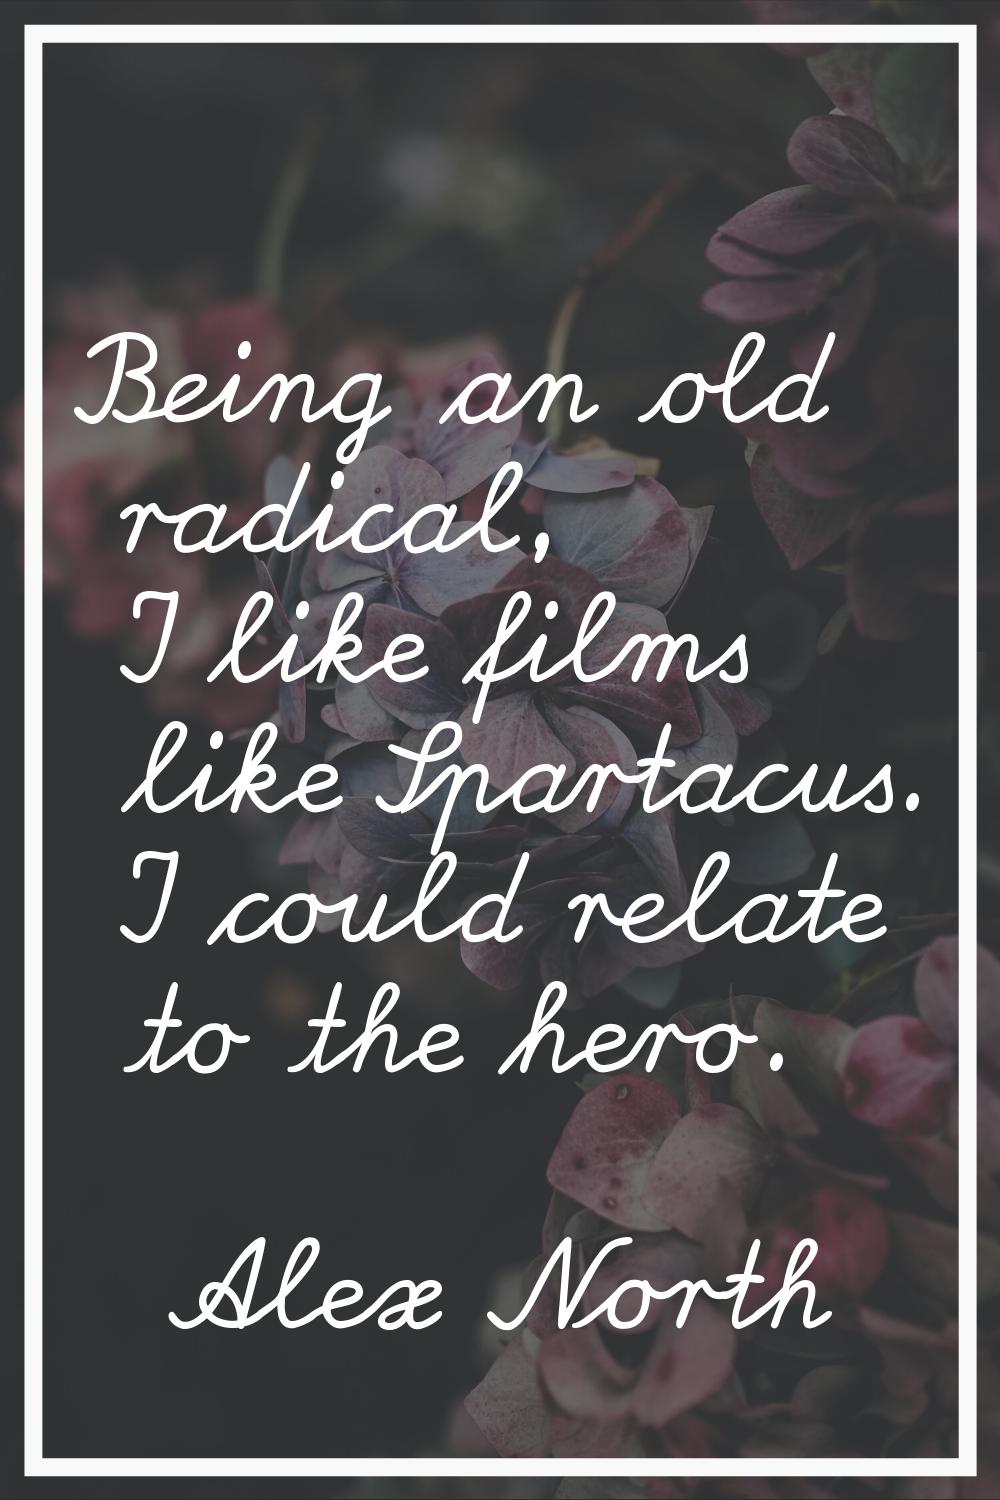 Being an old radical, I like films like Spartacus. I could relate to the hero.